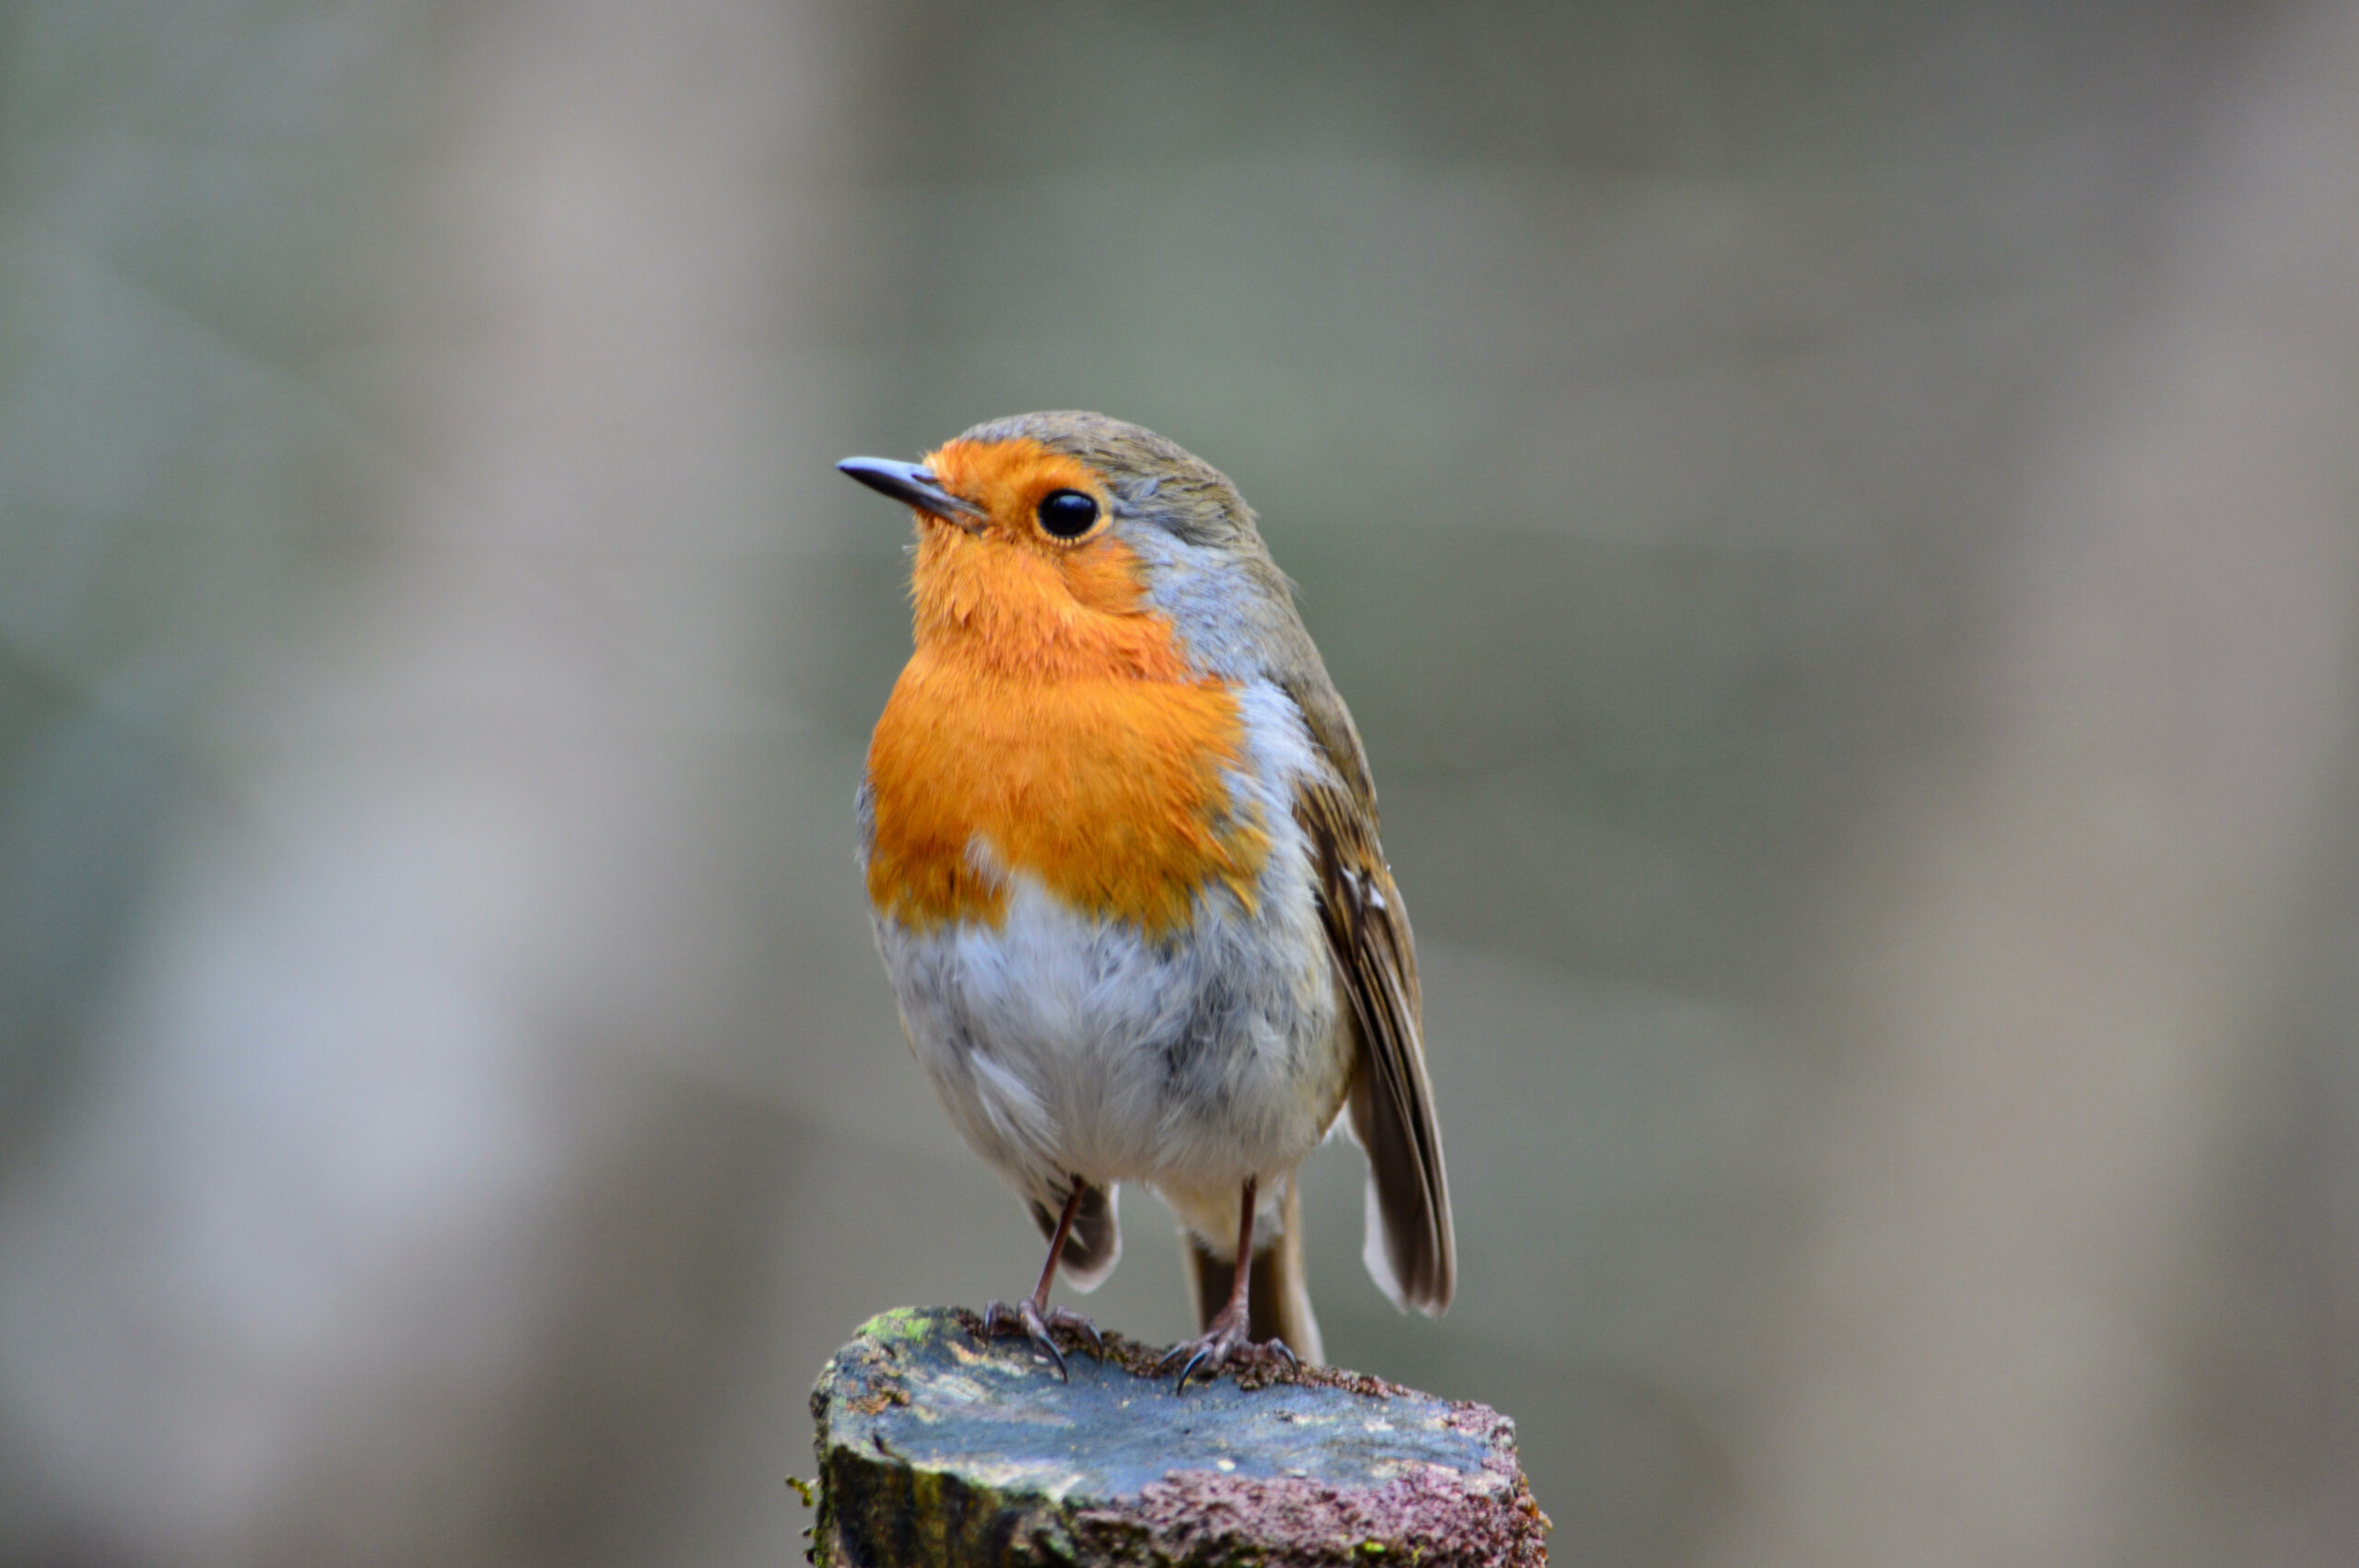 A robin stood on top of a wet wooden fencepost.